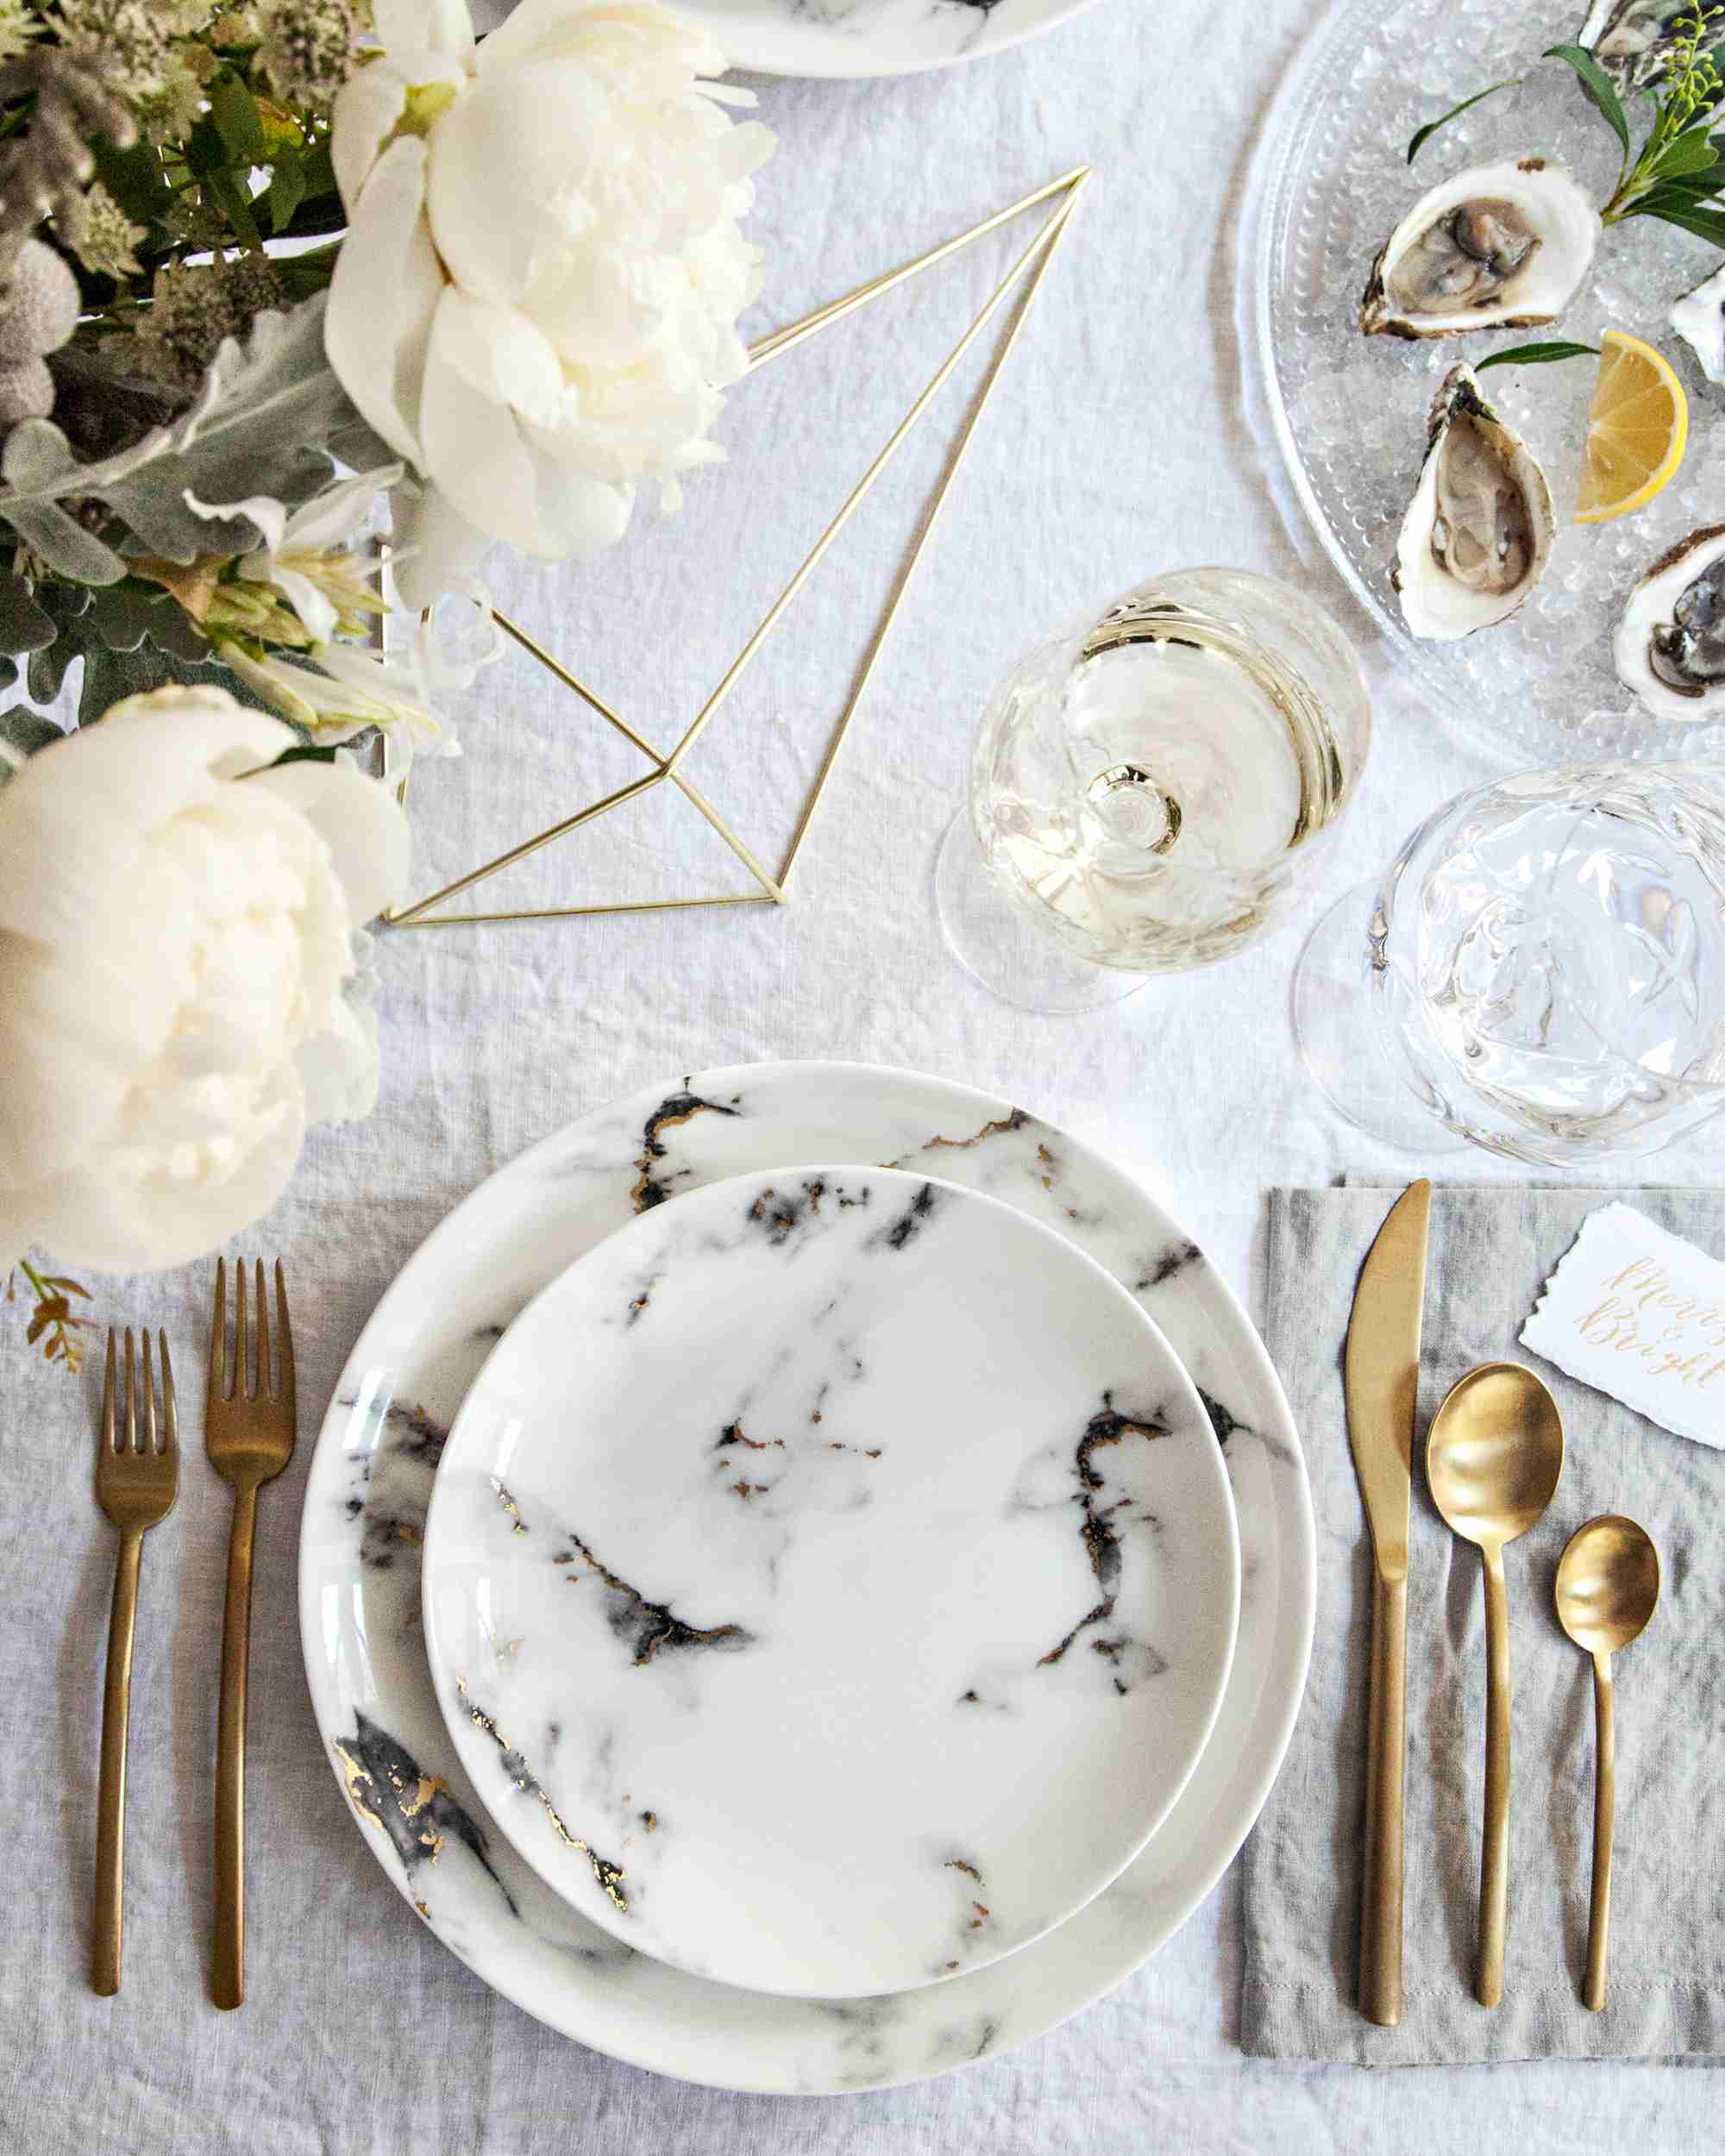 white dining table with Cutlery, plates, napkins, floral decorations and glasses